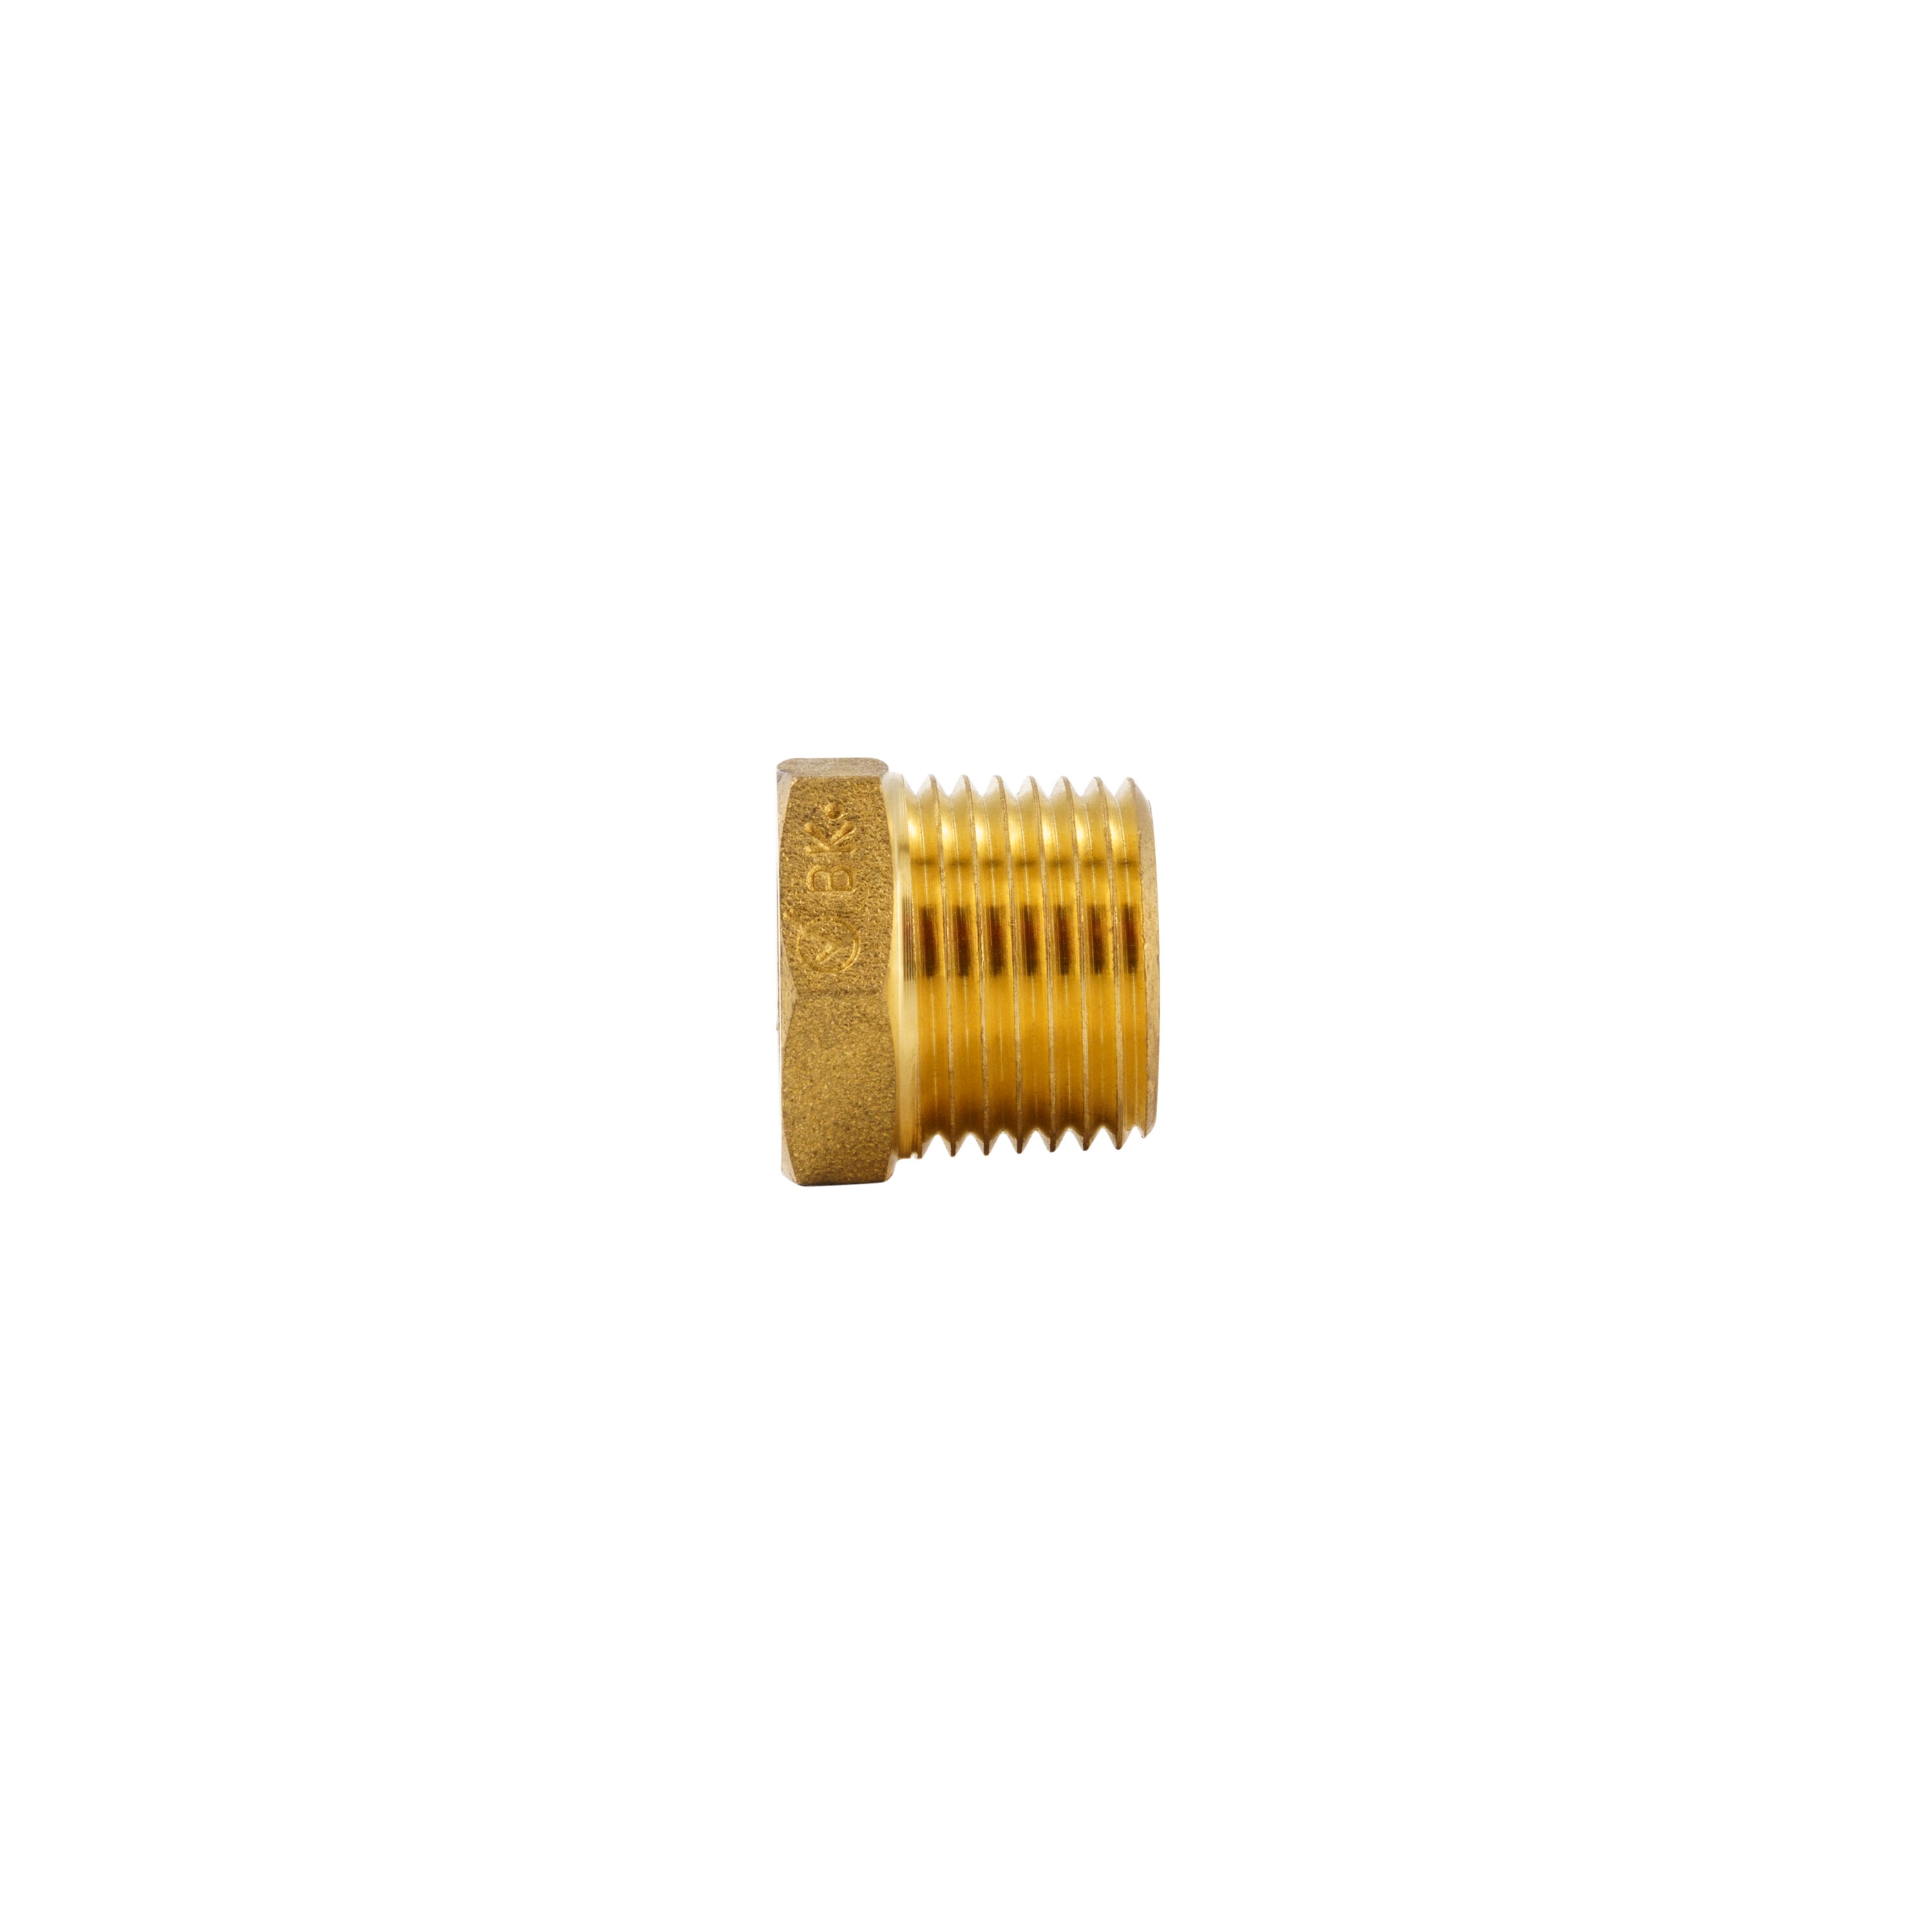 Proline Series 1/4-in Compression Nut Fitting in the Brass